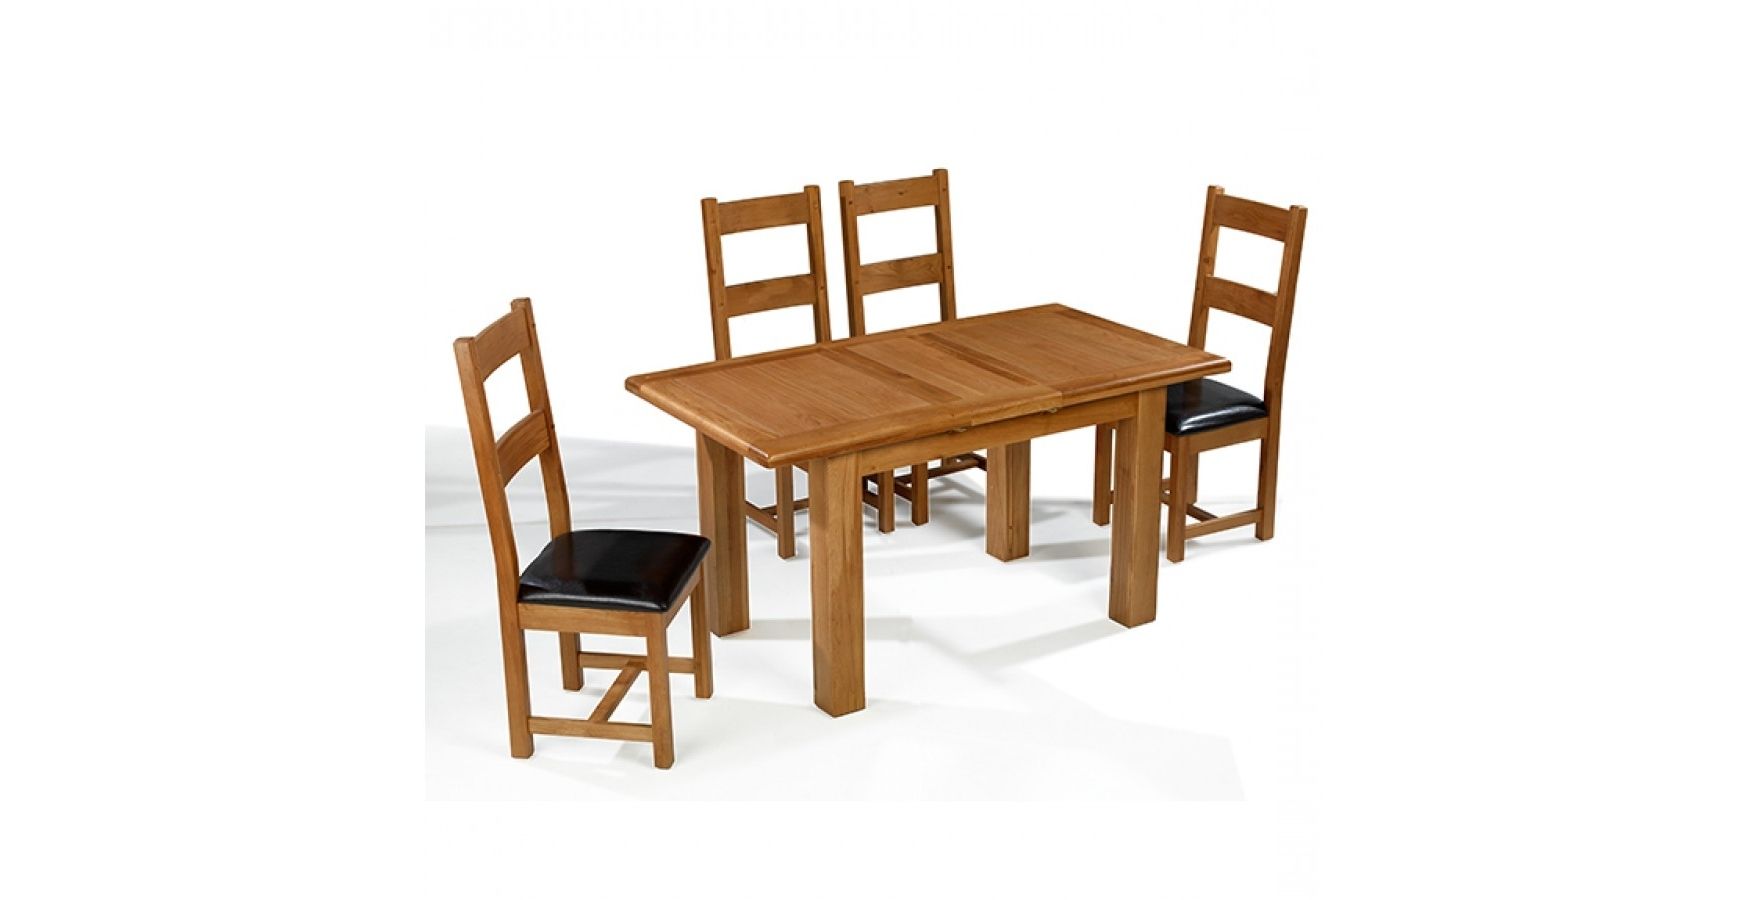 Emsworth Oak 132 198 Cm Extending Dining Table And 4 Chairs Intended For Recent Round Oak Extendable Dining Tables And Chairs (View 24 of 25)